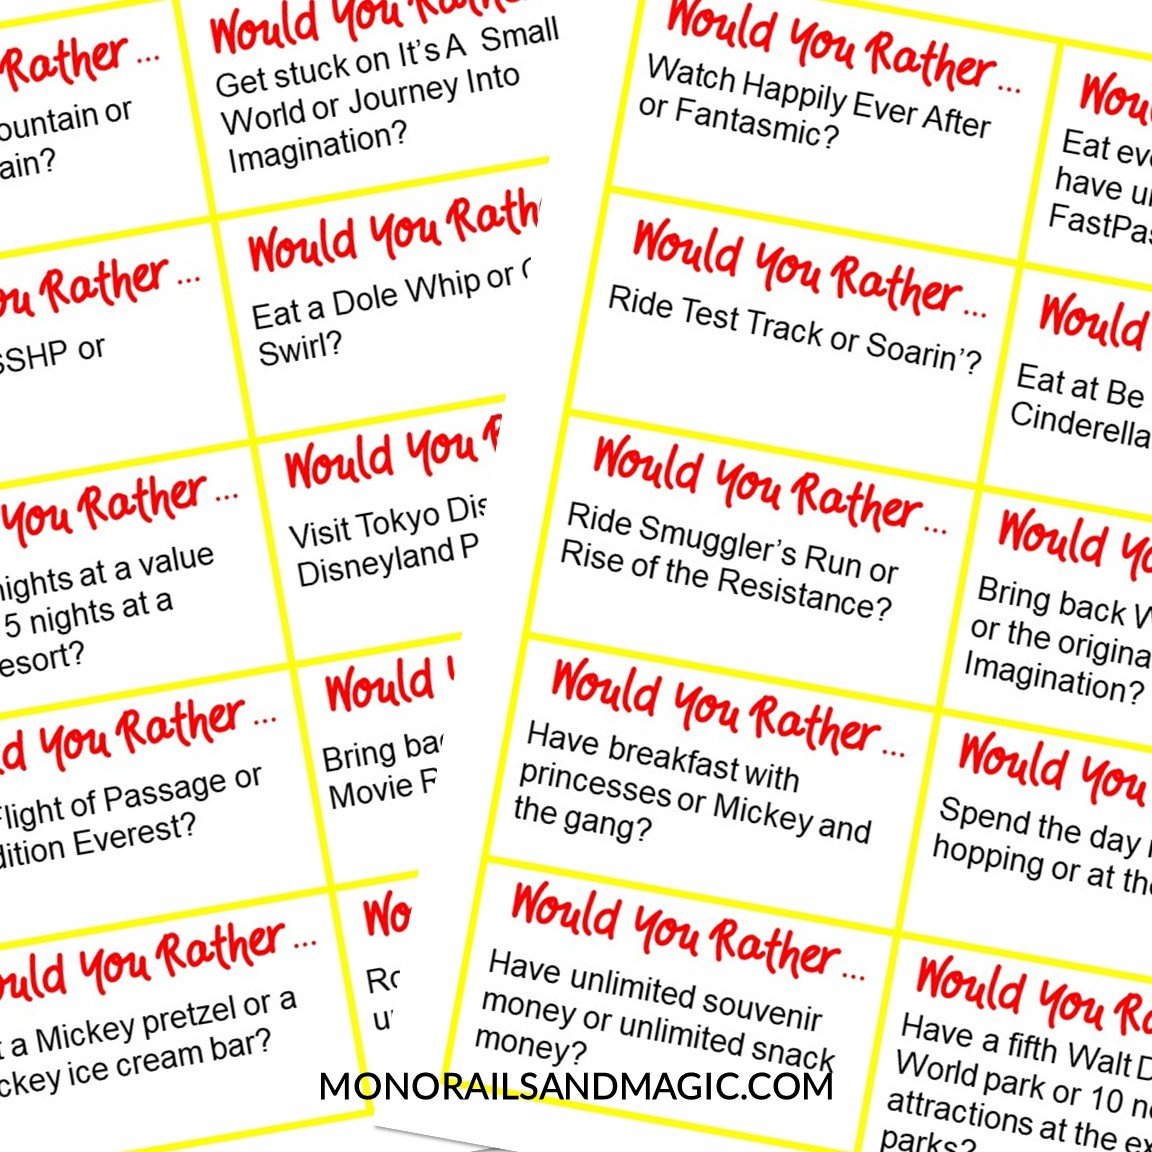 Free printable would you rather game for Walt Disney World fans.